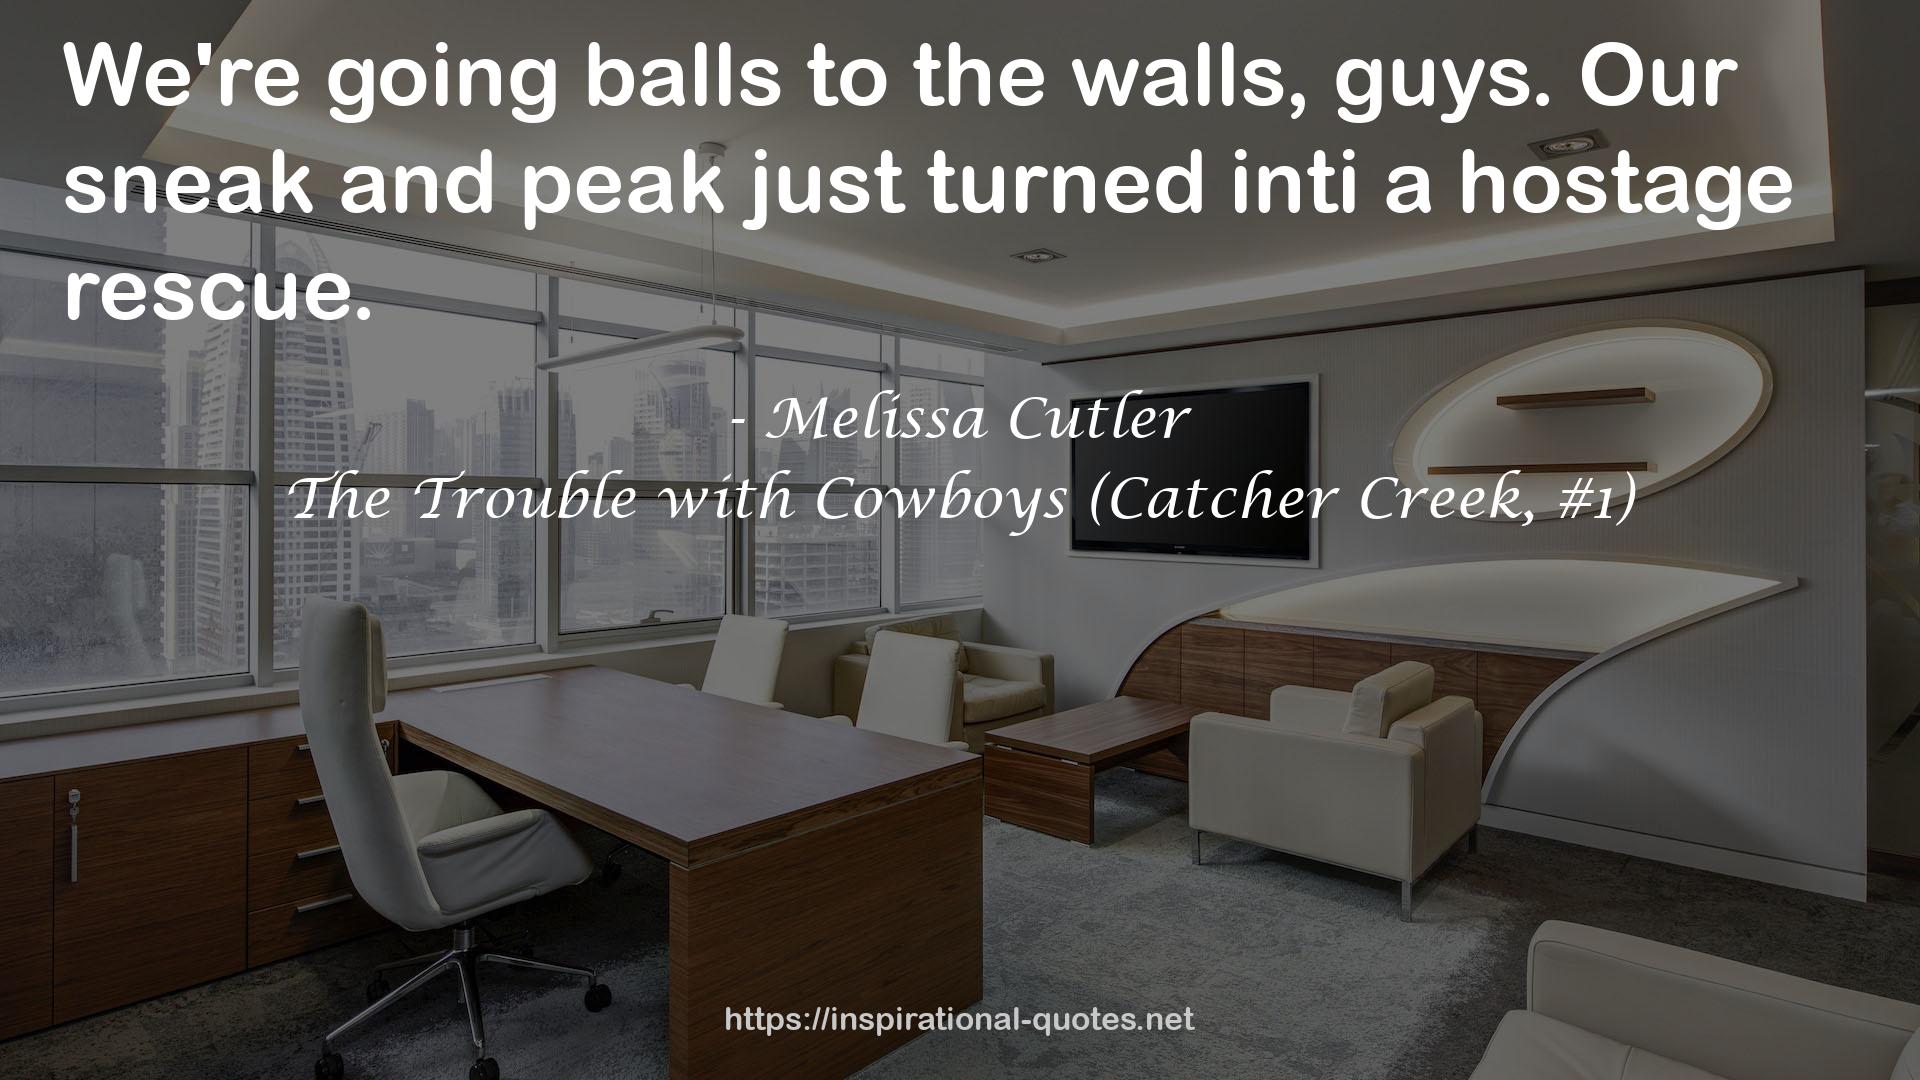 The Trouble with Cowboys (Catcher Creek, #1) QUOTES